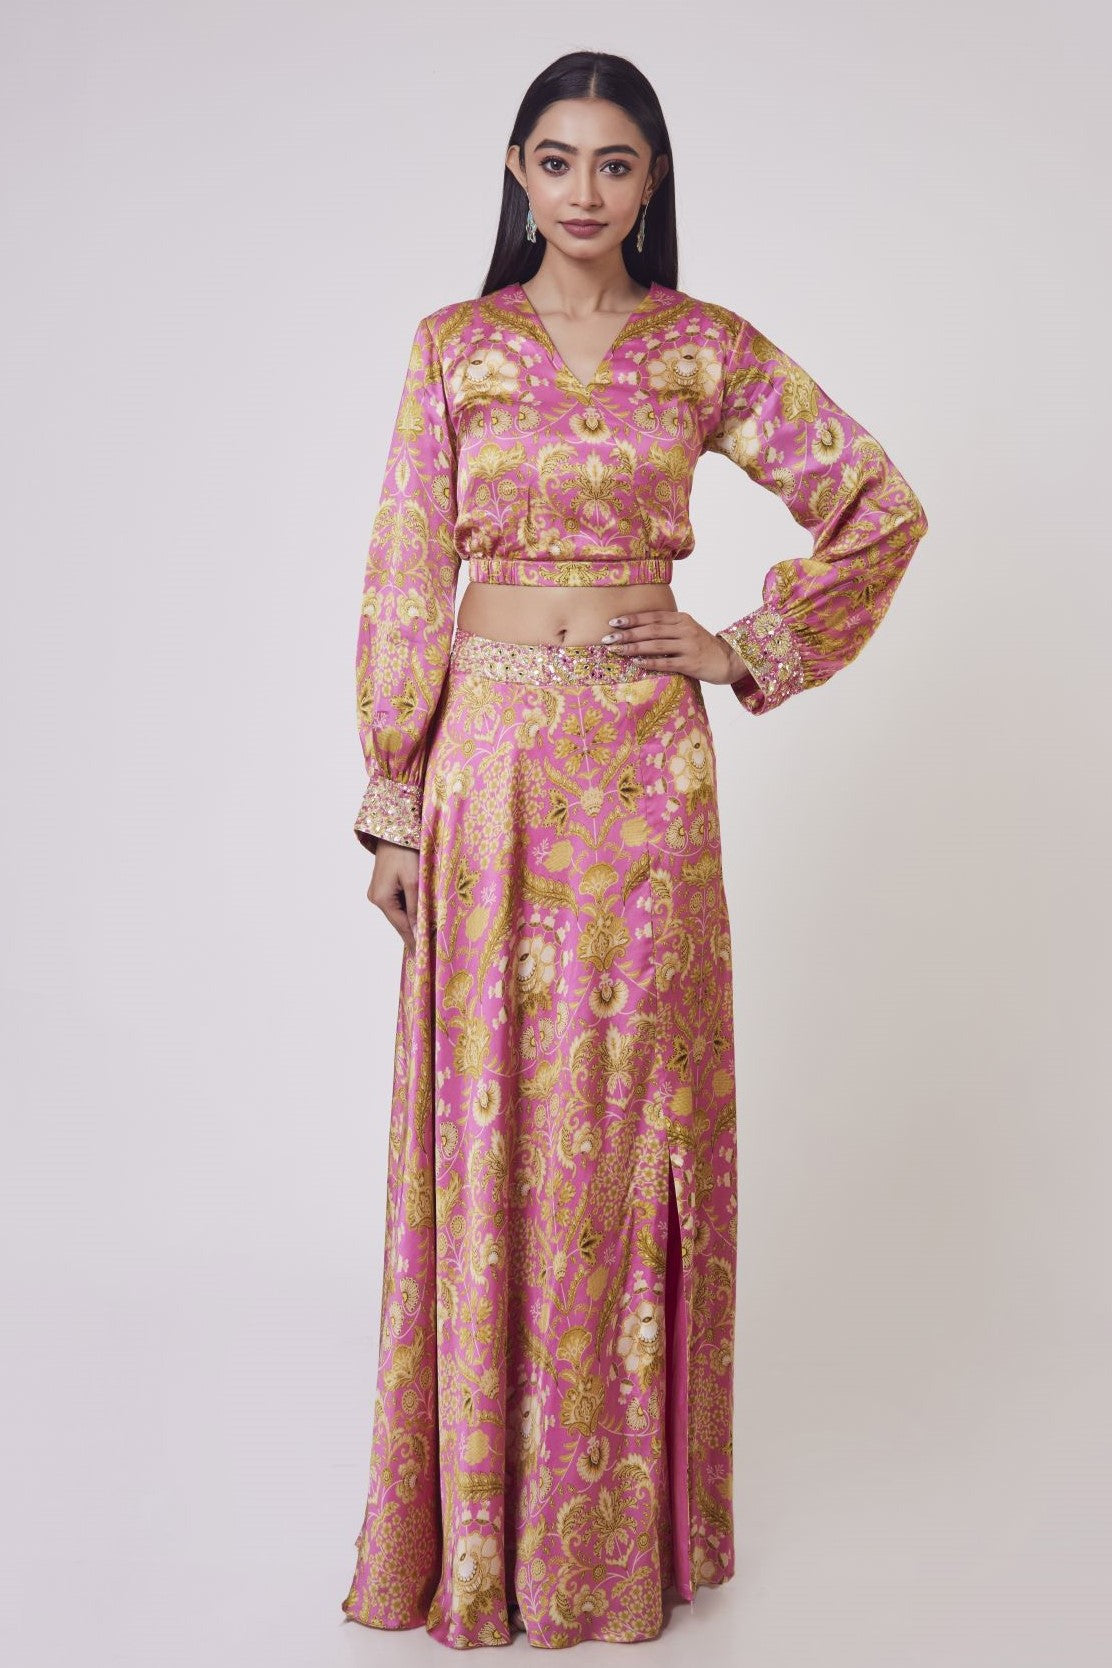 Buy stunning pink floral print satin Indowestern dress online in USA. Dazzle on weddings and special occasions with exquisite Indian designer dresses, sharara suits, Anarkali suits, wedding lehengas from Pure Elegance Indian fashion store in USA.-full view